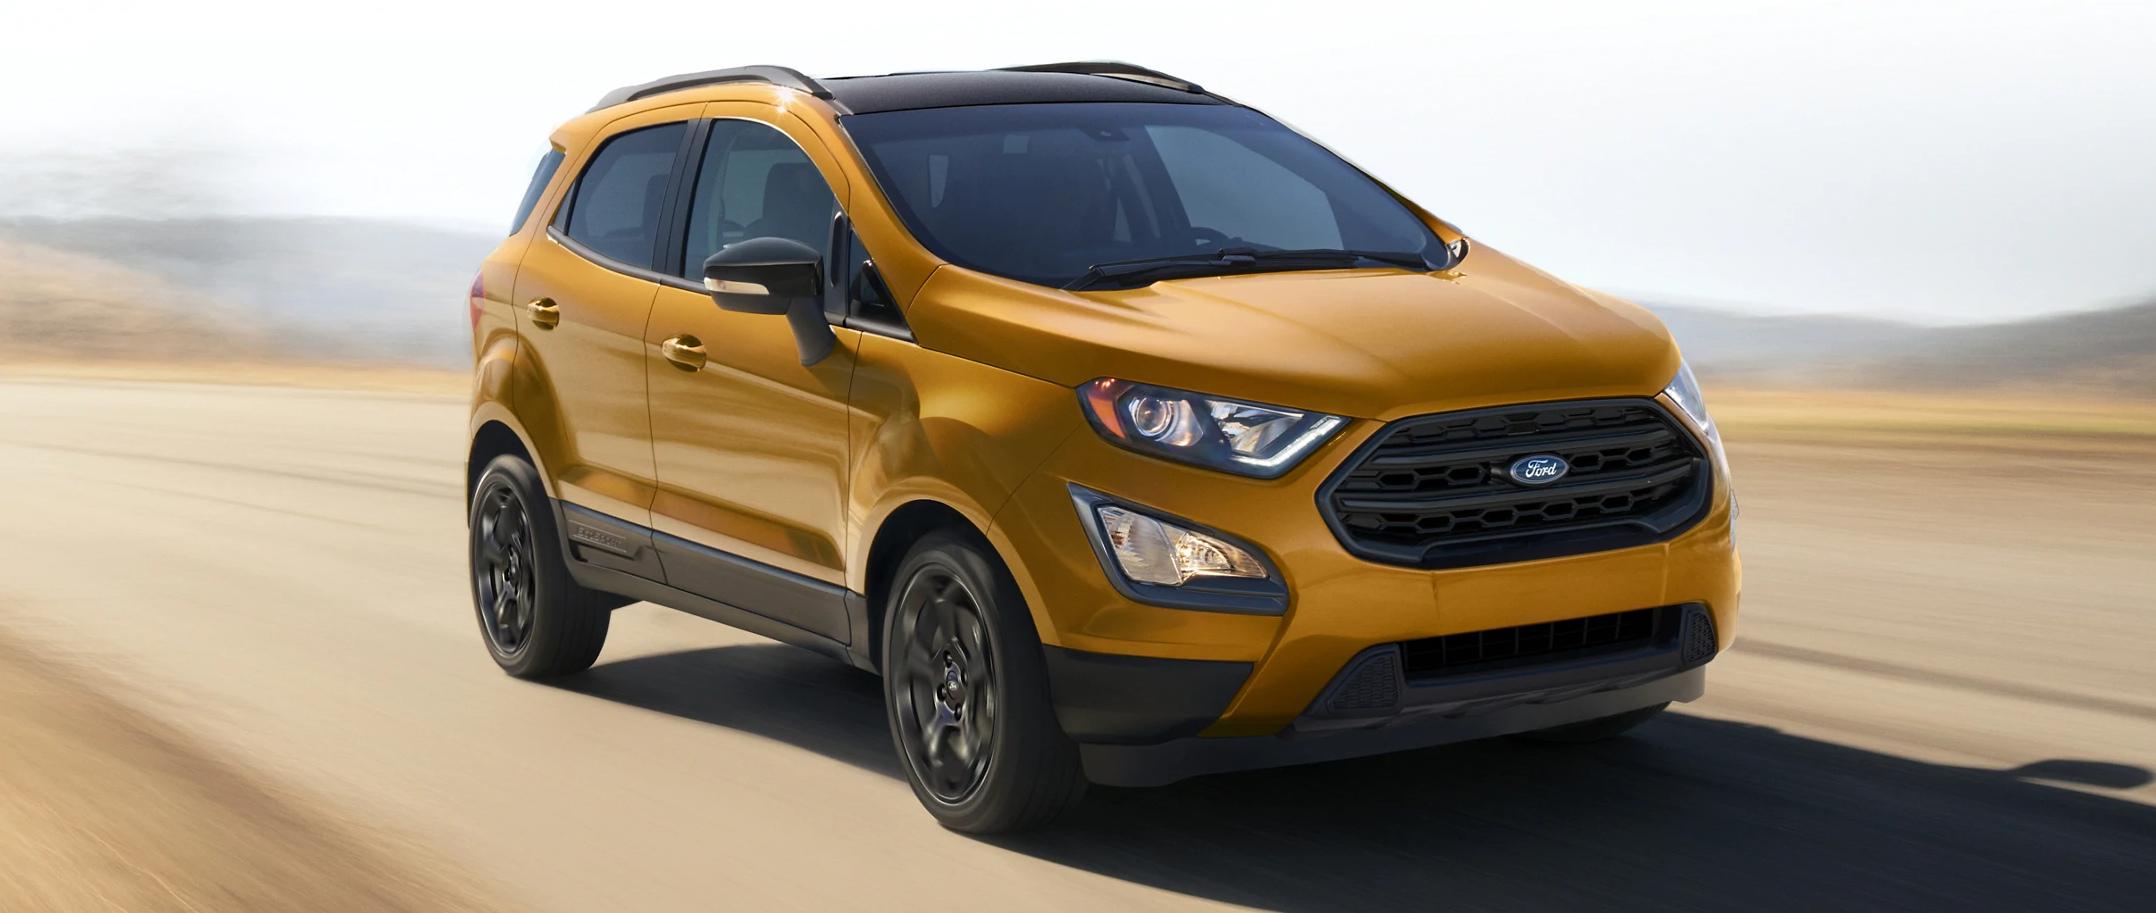 2021 Ford EcoSport  Your Top Daily Driver Choice